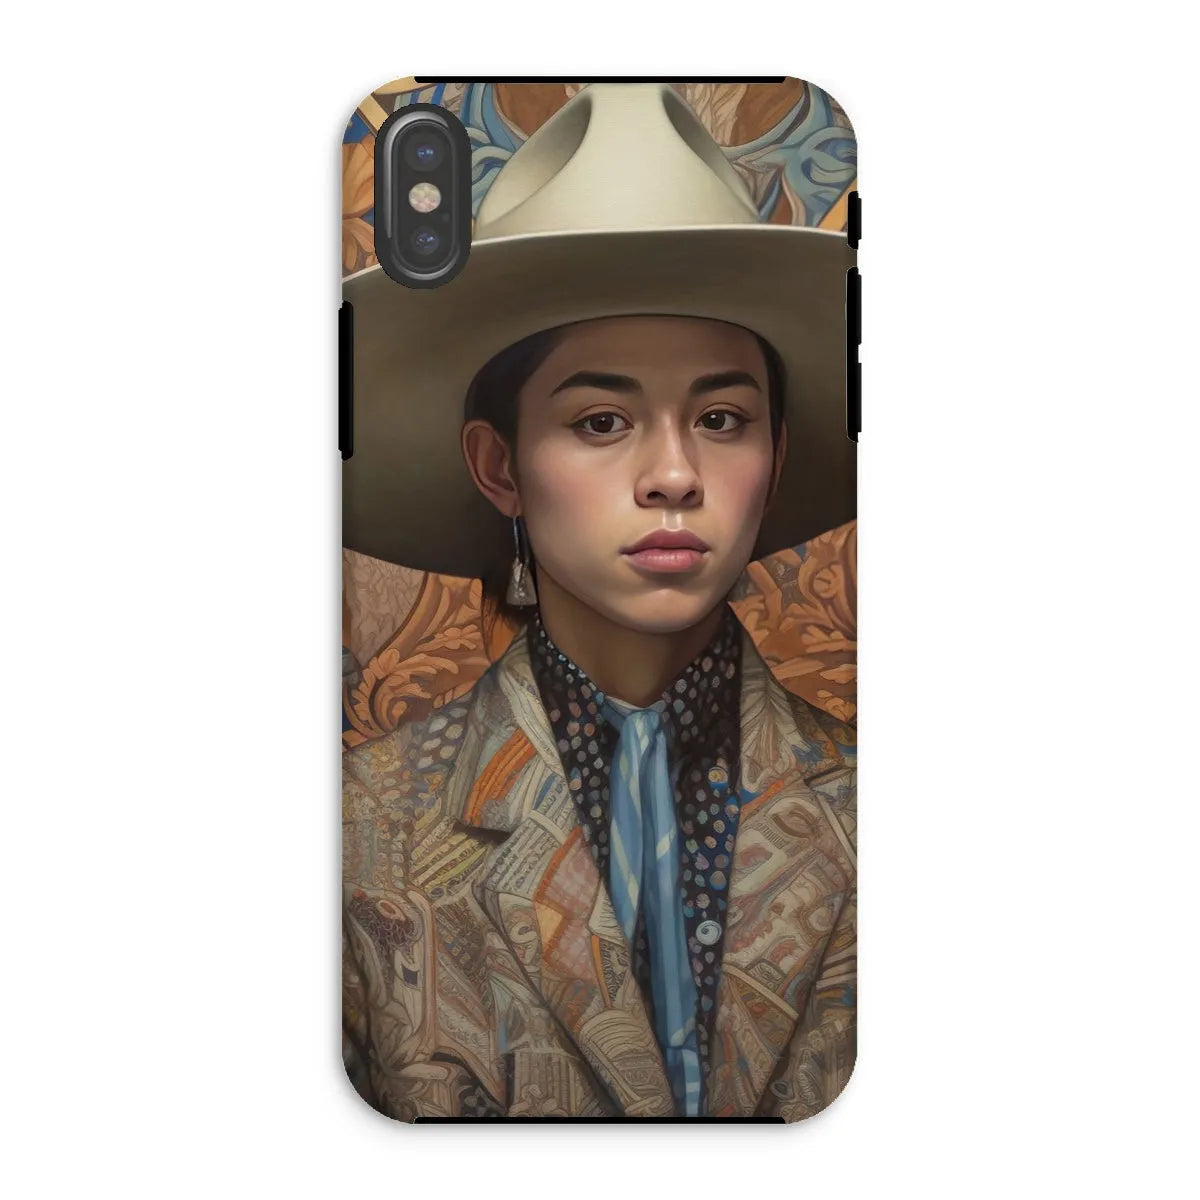 Angel The Transgender Cowboy - F2m Outlaw Art Phone Case - Iphone Xs / Matte - Mobile Phone Cases - Aesthetic Art